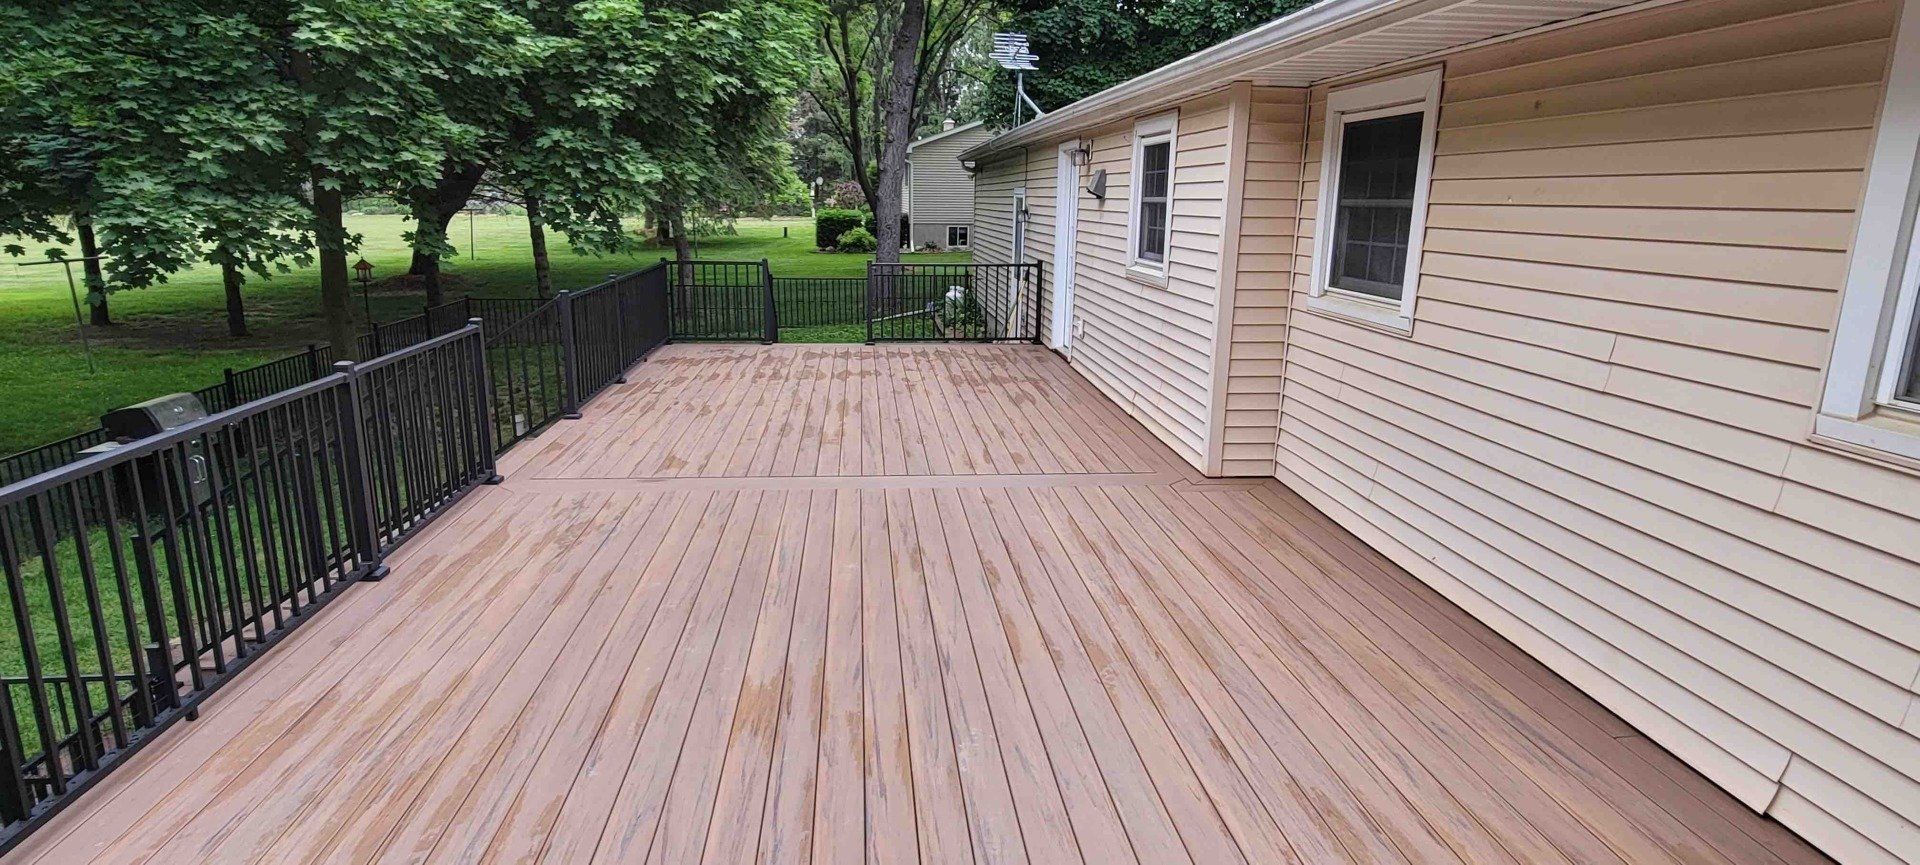 there is a large wooden deck in front of a house .